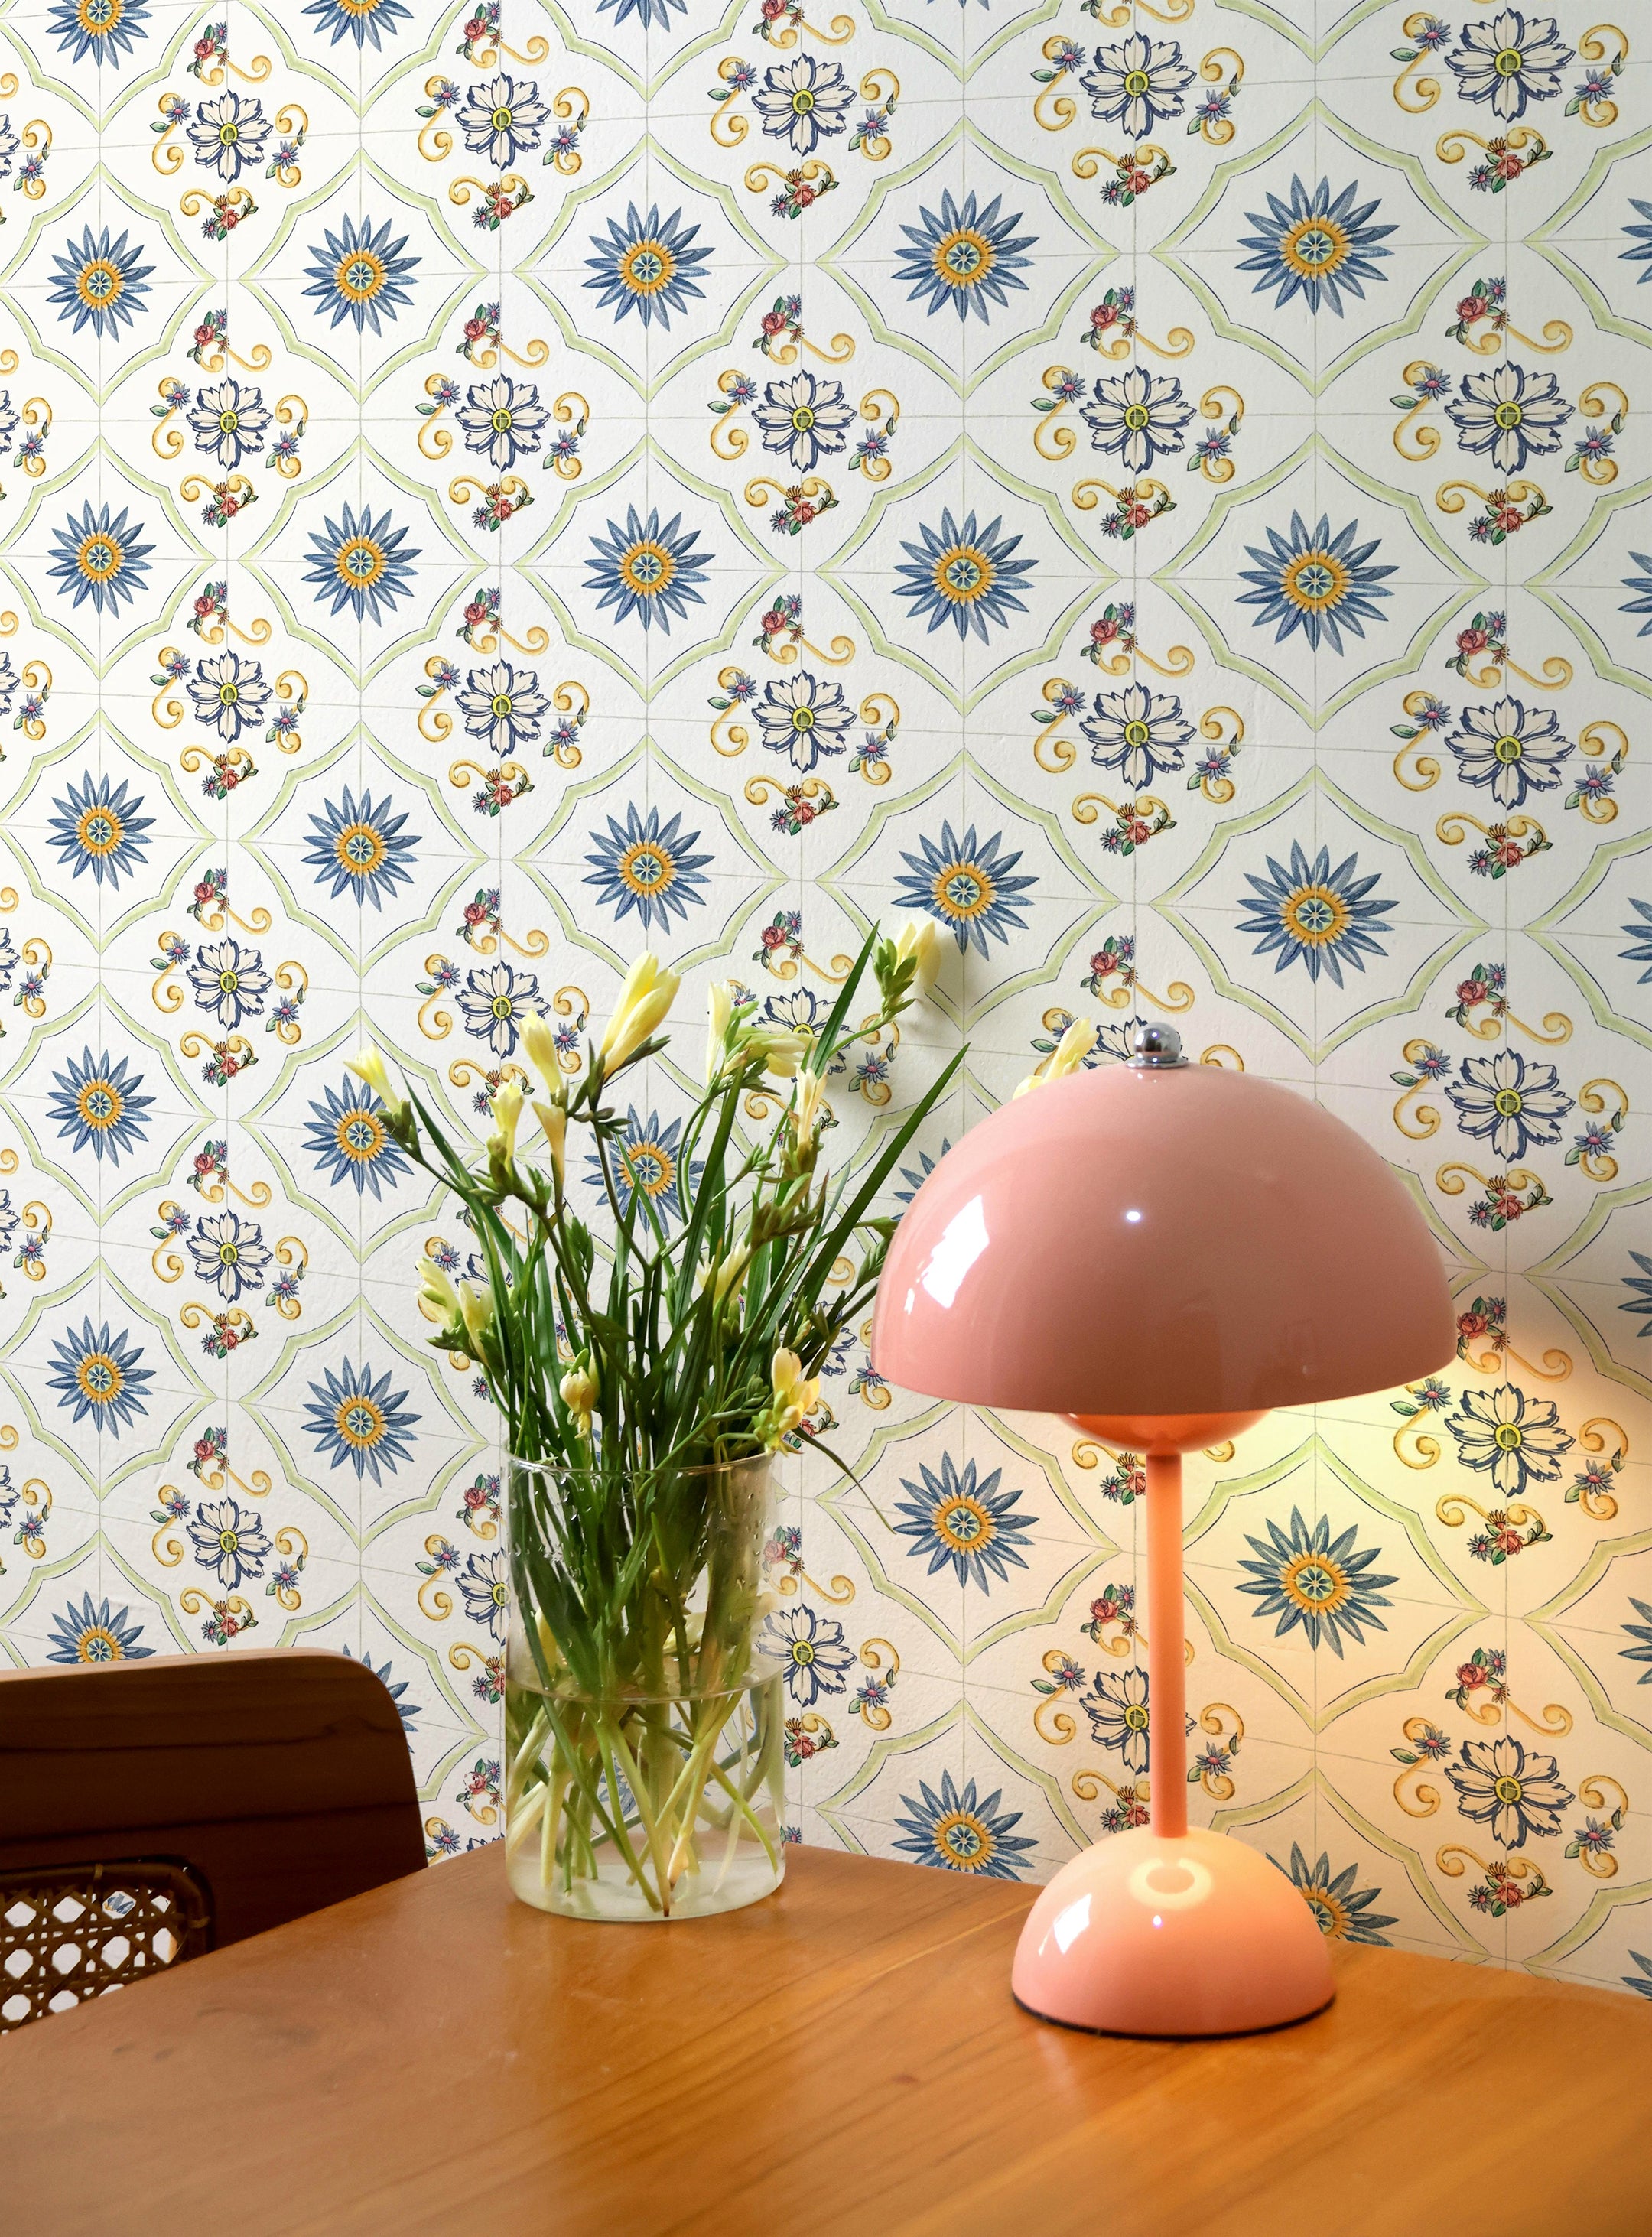 An interior setting with the Spanish Tile Wallpaper in the background enhancing a mid-century modern decor. A pastel pink mushroom lamp sits on a wooden table, alongside a vase with fresh tulips, creating a warm and inviting ambiance